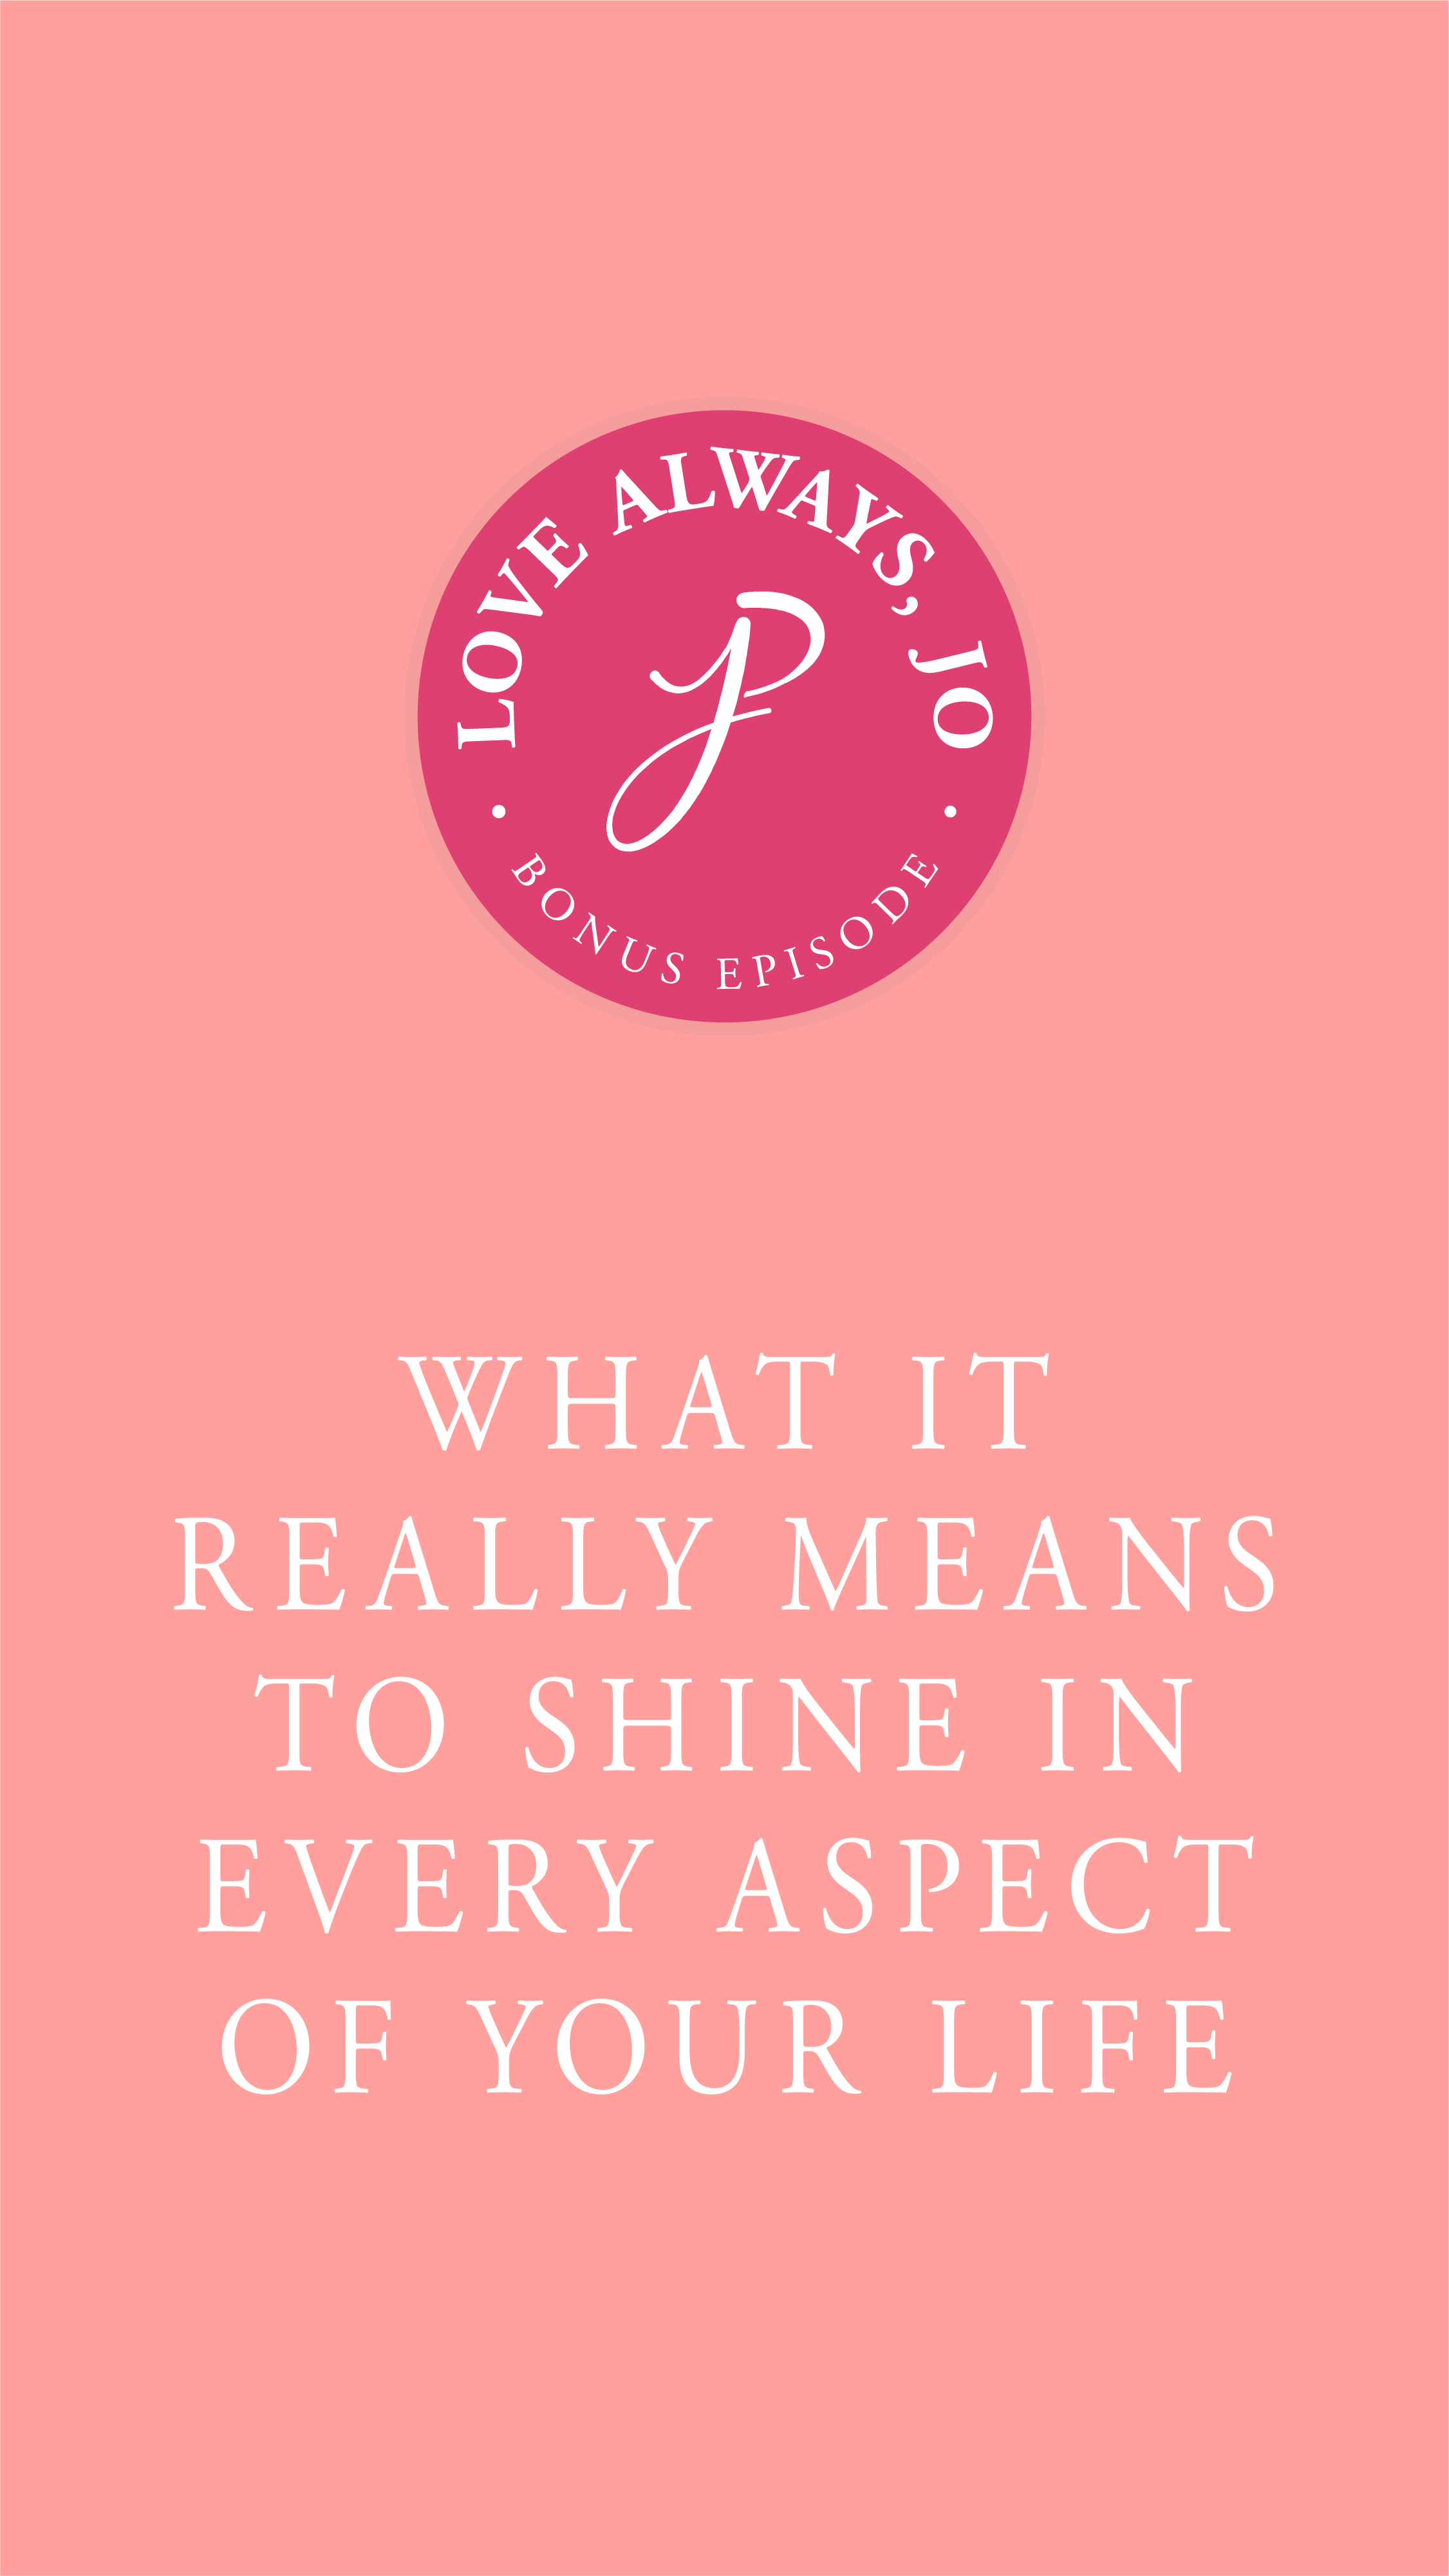 What it really means to shine in every aspect of your life